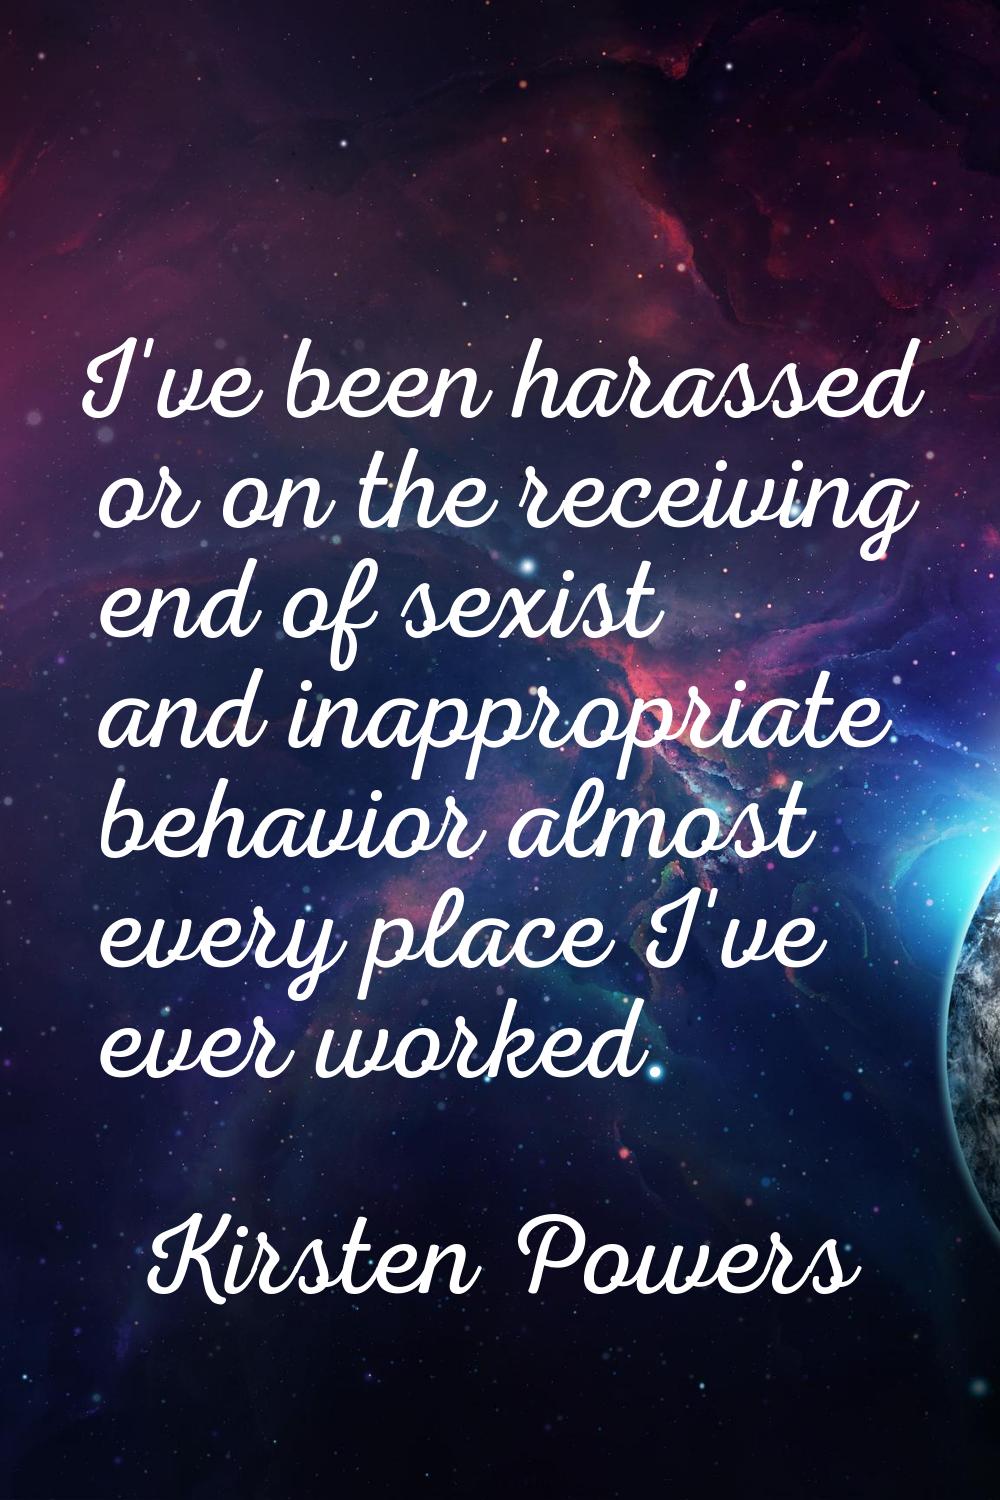 I've been harassed or on the receiving end of sexist and inappropriate behavior almost every place 